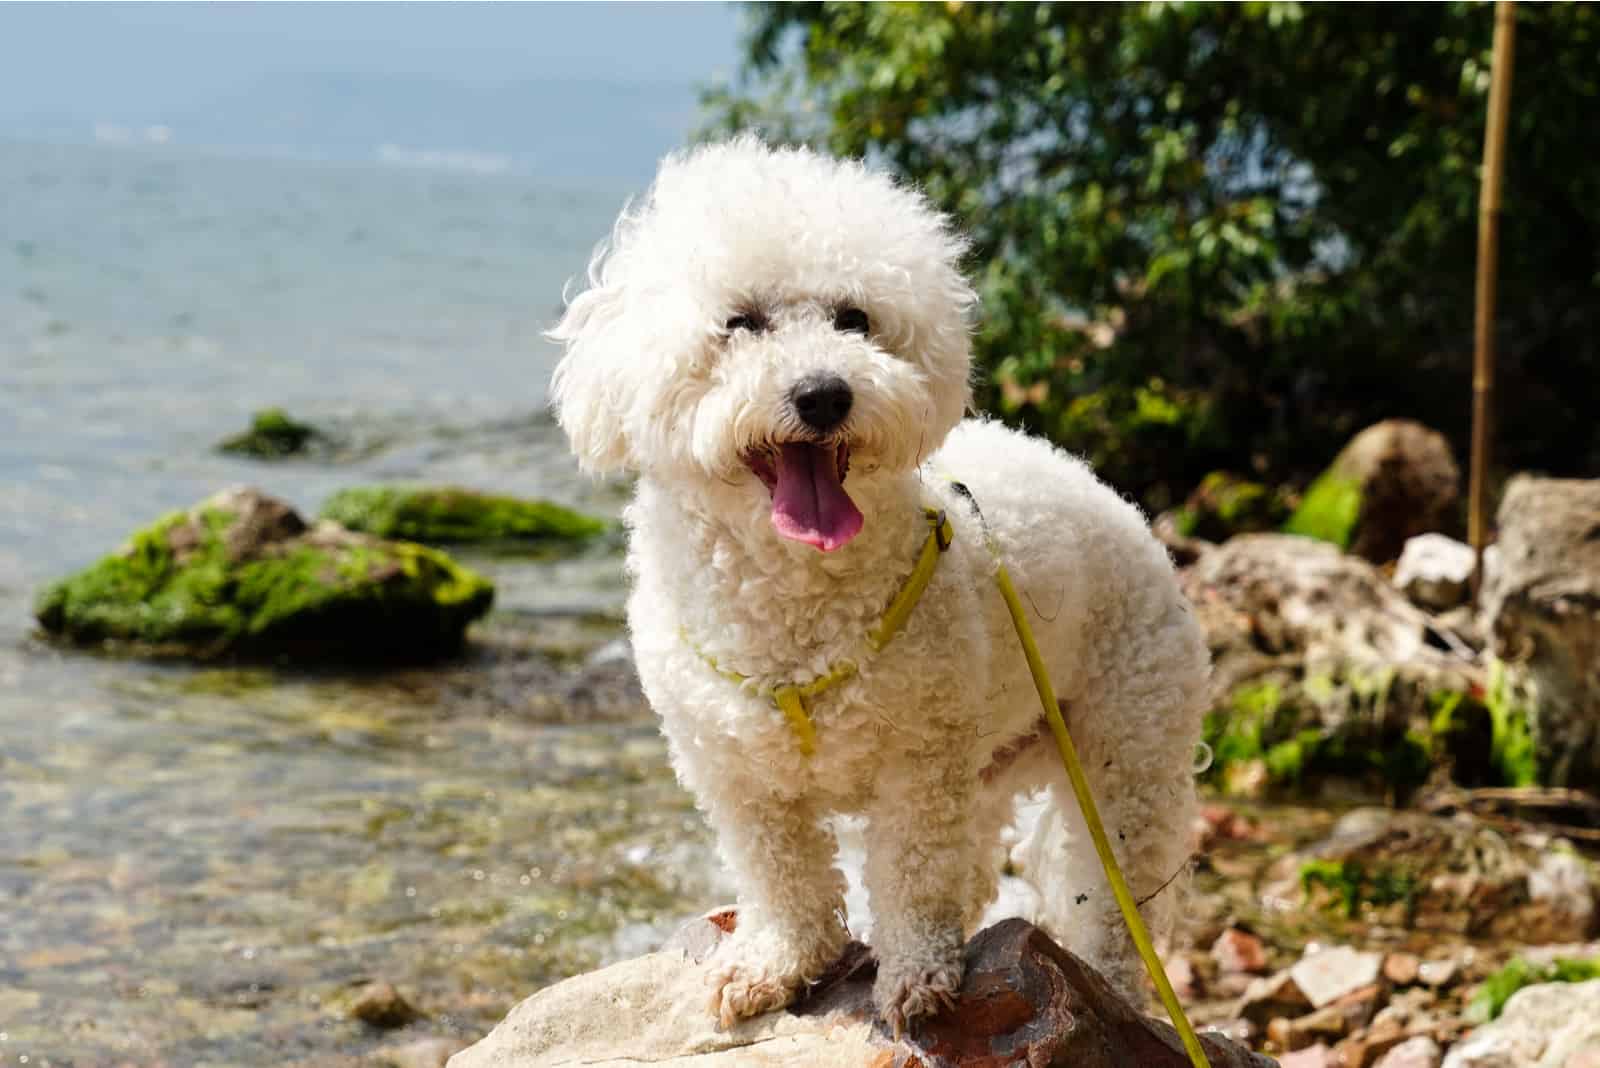 Bichon Frise standing by the river